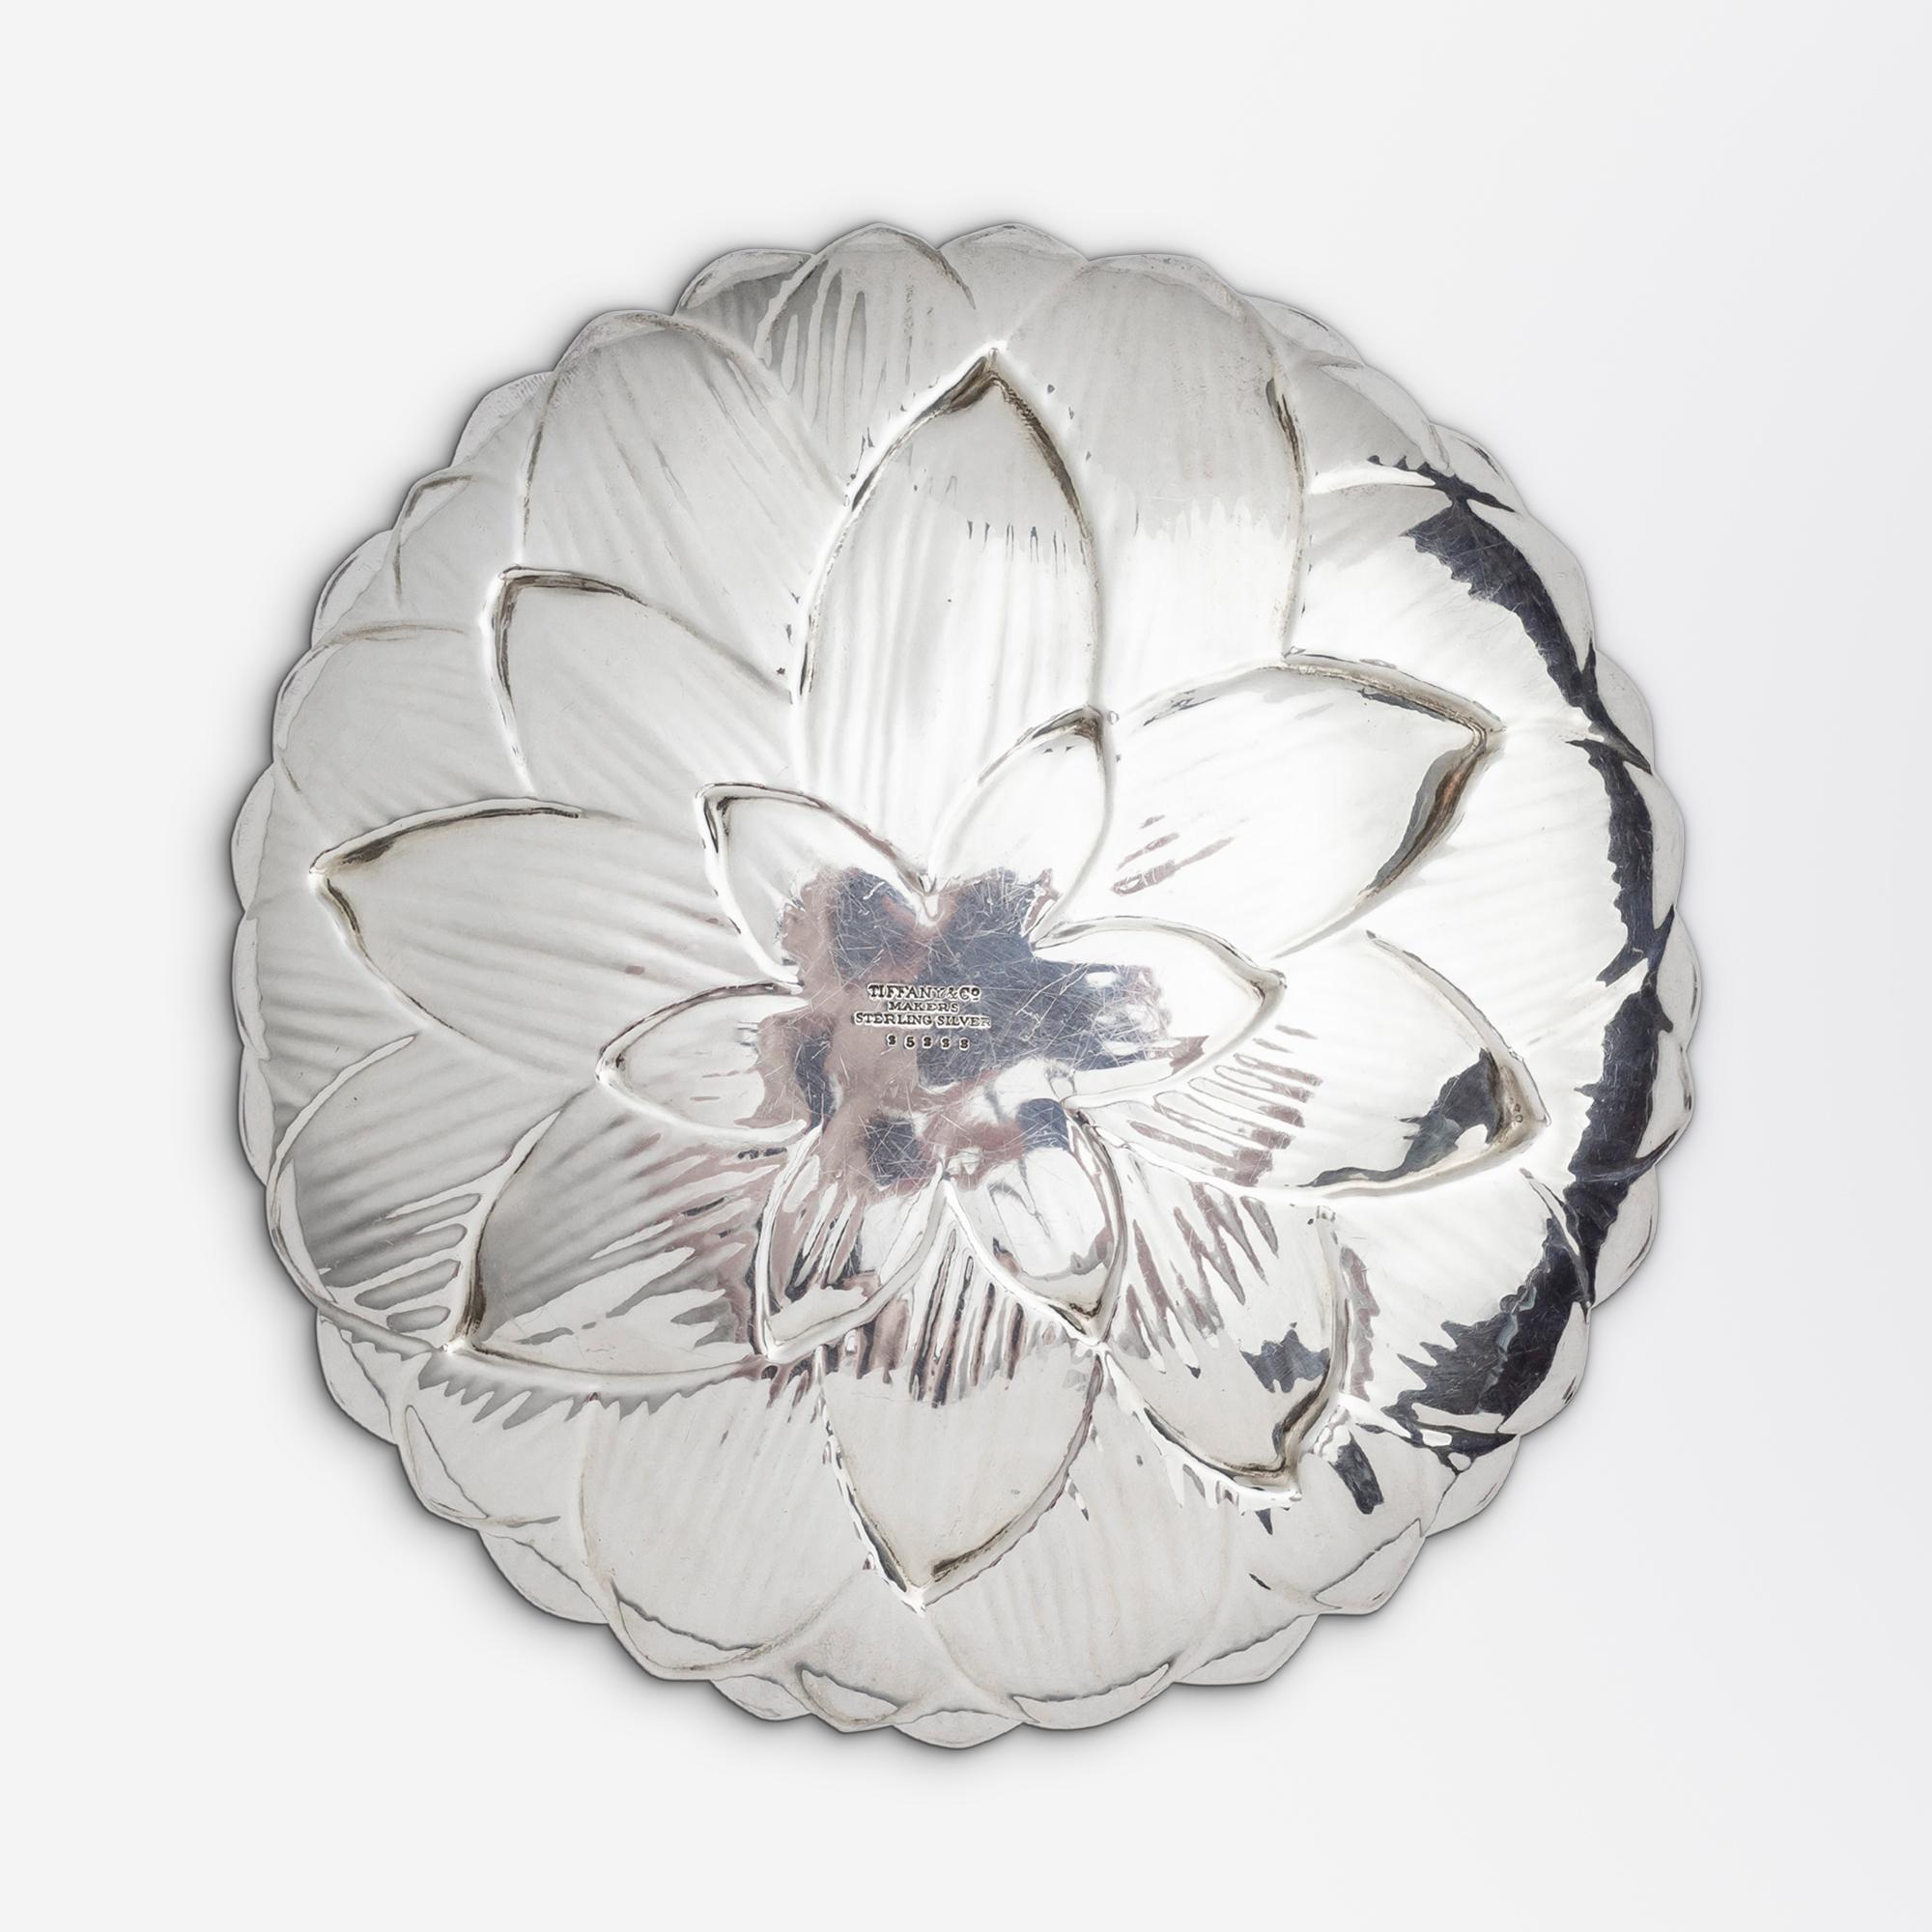 A sterling silver dish in the form of a lotus blossom or water lily by esteemed maker, Tiffany & Co. The round dish features a post 1965 hallmark for manufacture by the firm and has a pattern number of '25223'. The dish is sculpted to curl up